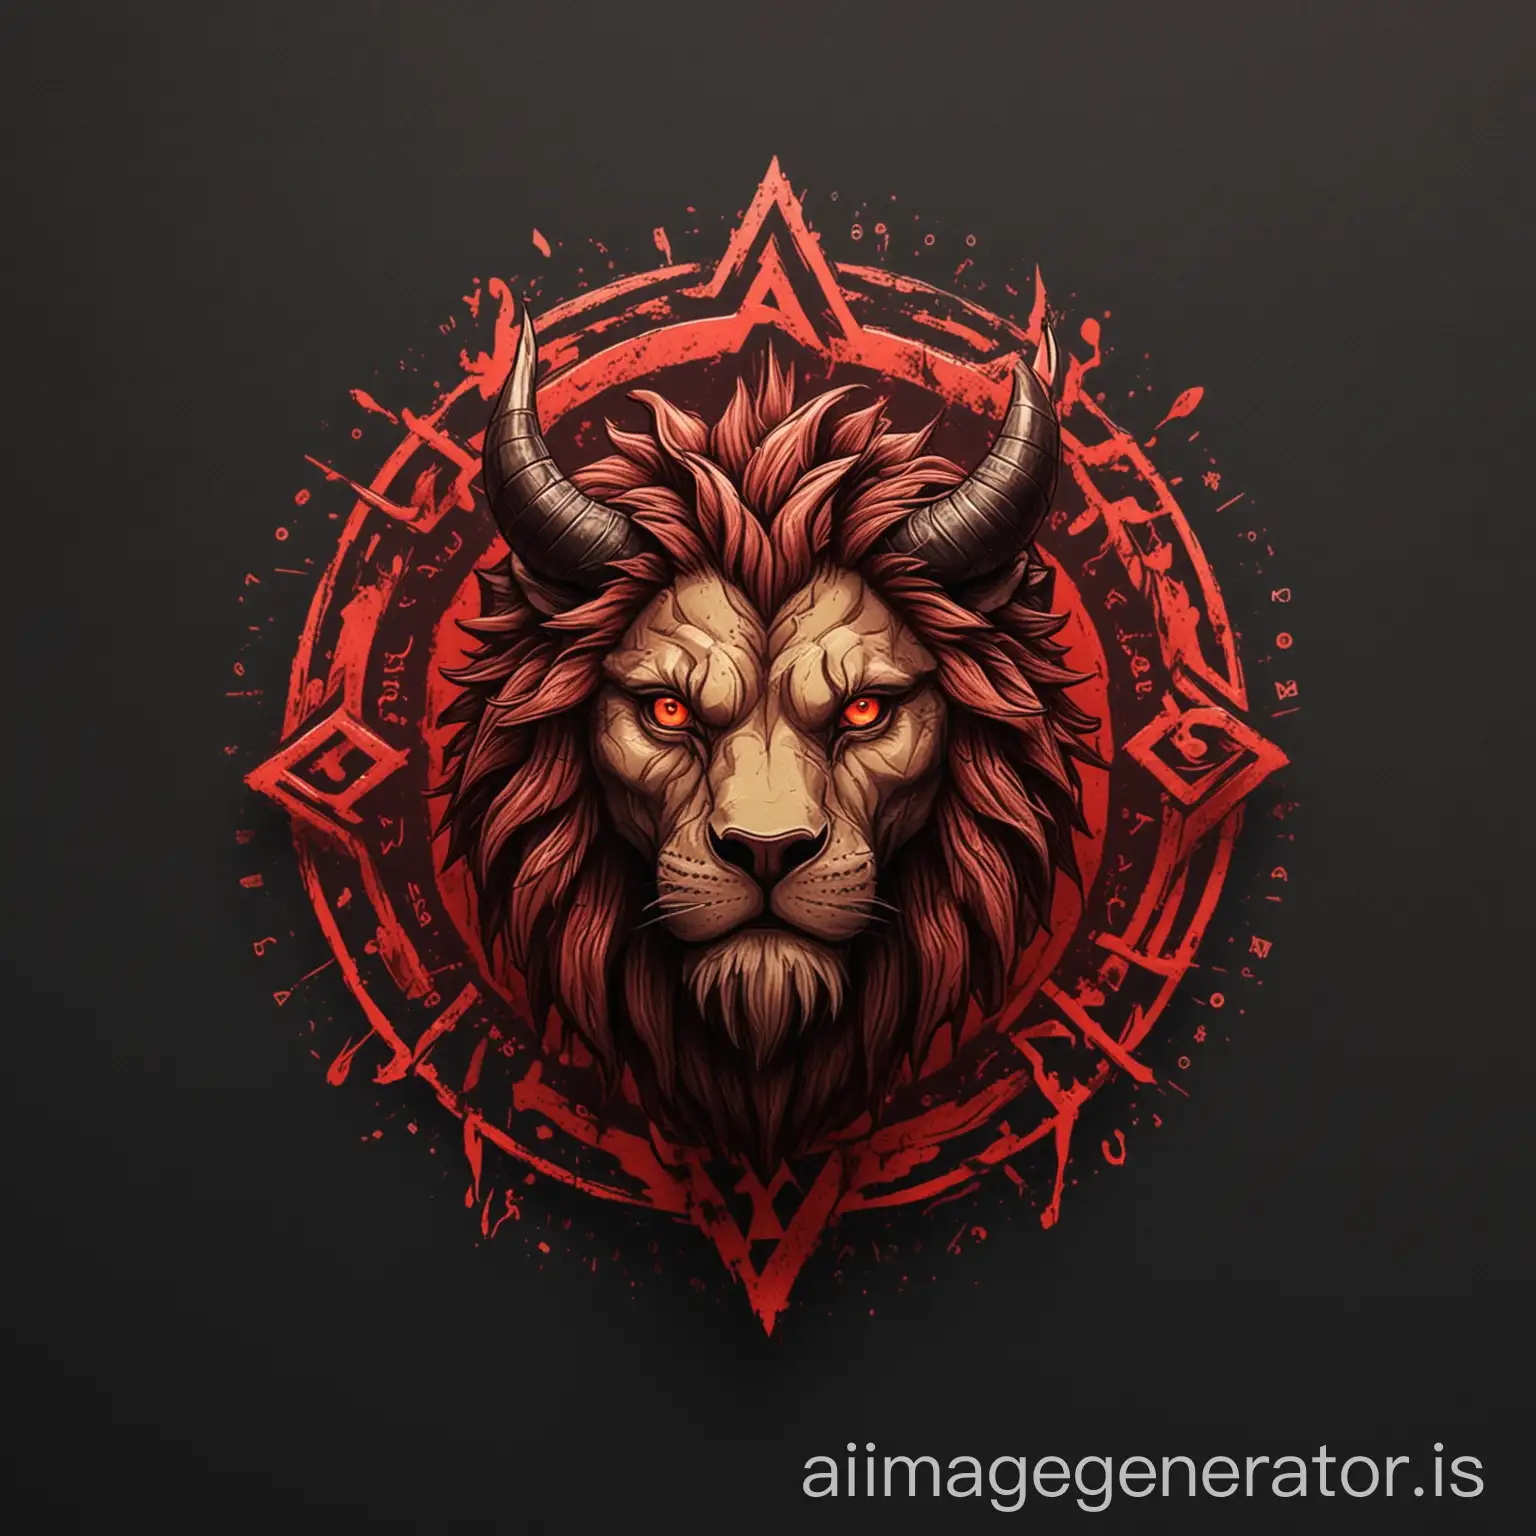 Draw a logo for a crypto exchange, in itnanaznazeniya Bloods Bulls - and the logo itself on the theme of cryptocurrencies, the logo should be lion with a reference to Satan and attract attention and title is the A i r d r o p LK. Make the logo in good quality.